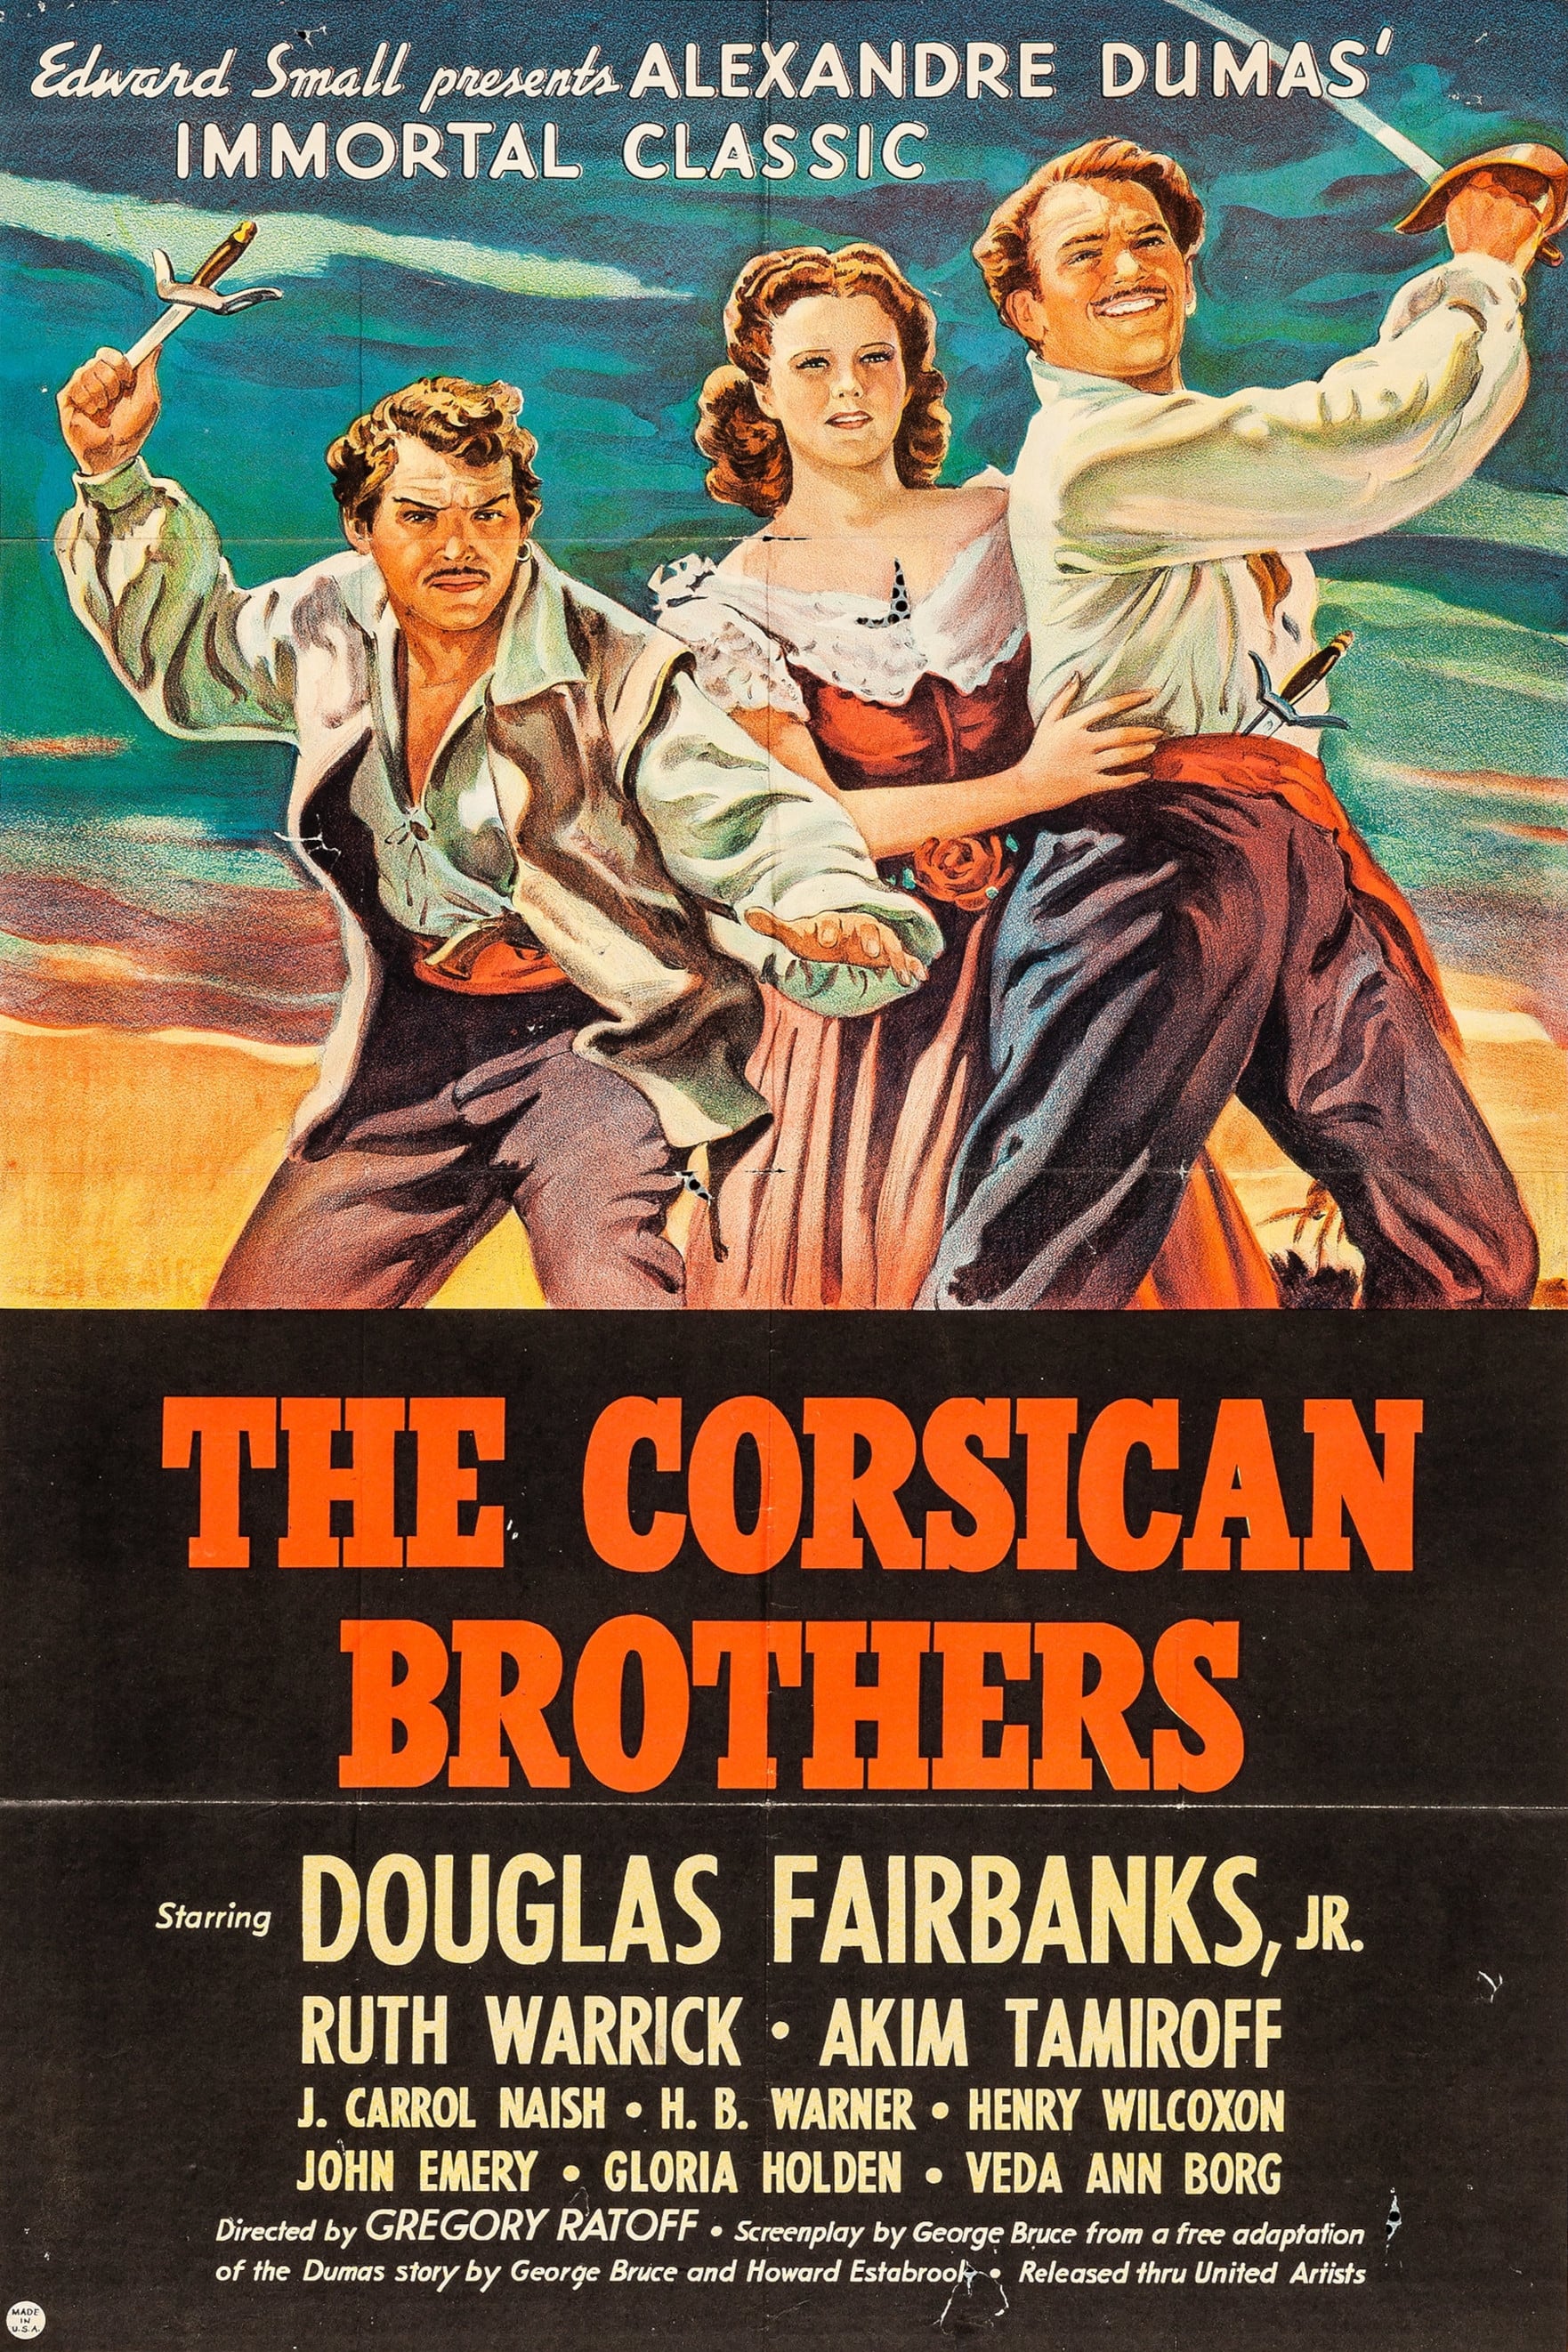 The Corsican Brothers (1941)